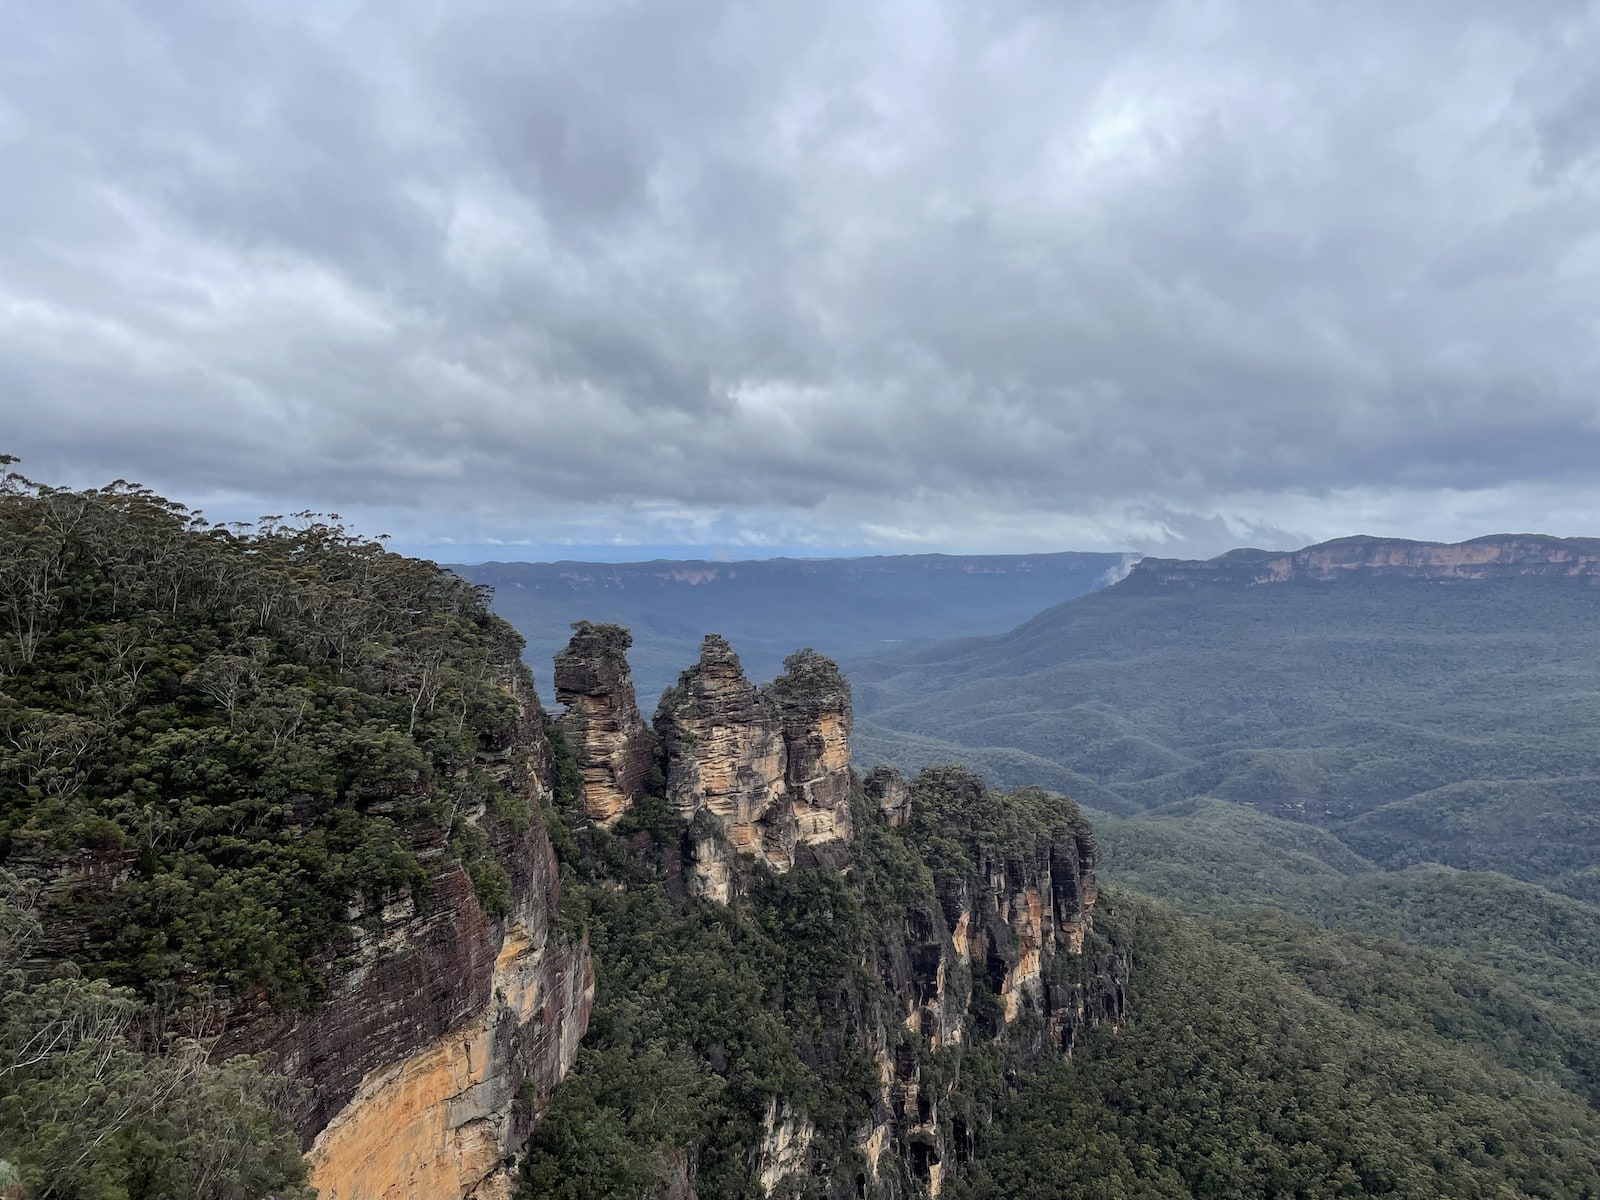 The Three Sisters in the Blue Mountains in Australia – three giant rock formations at the outset of mountain cliffs. The sky is cloudy